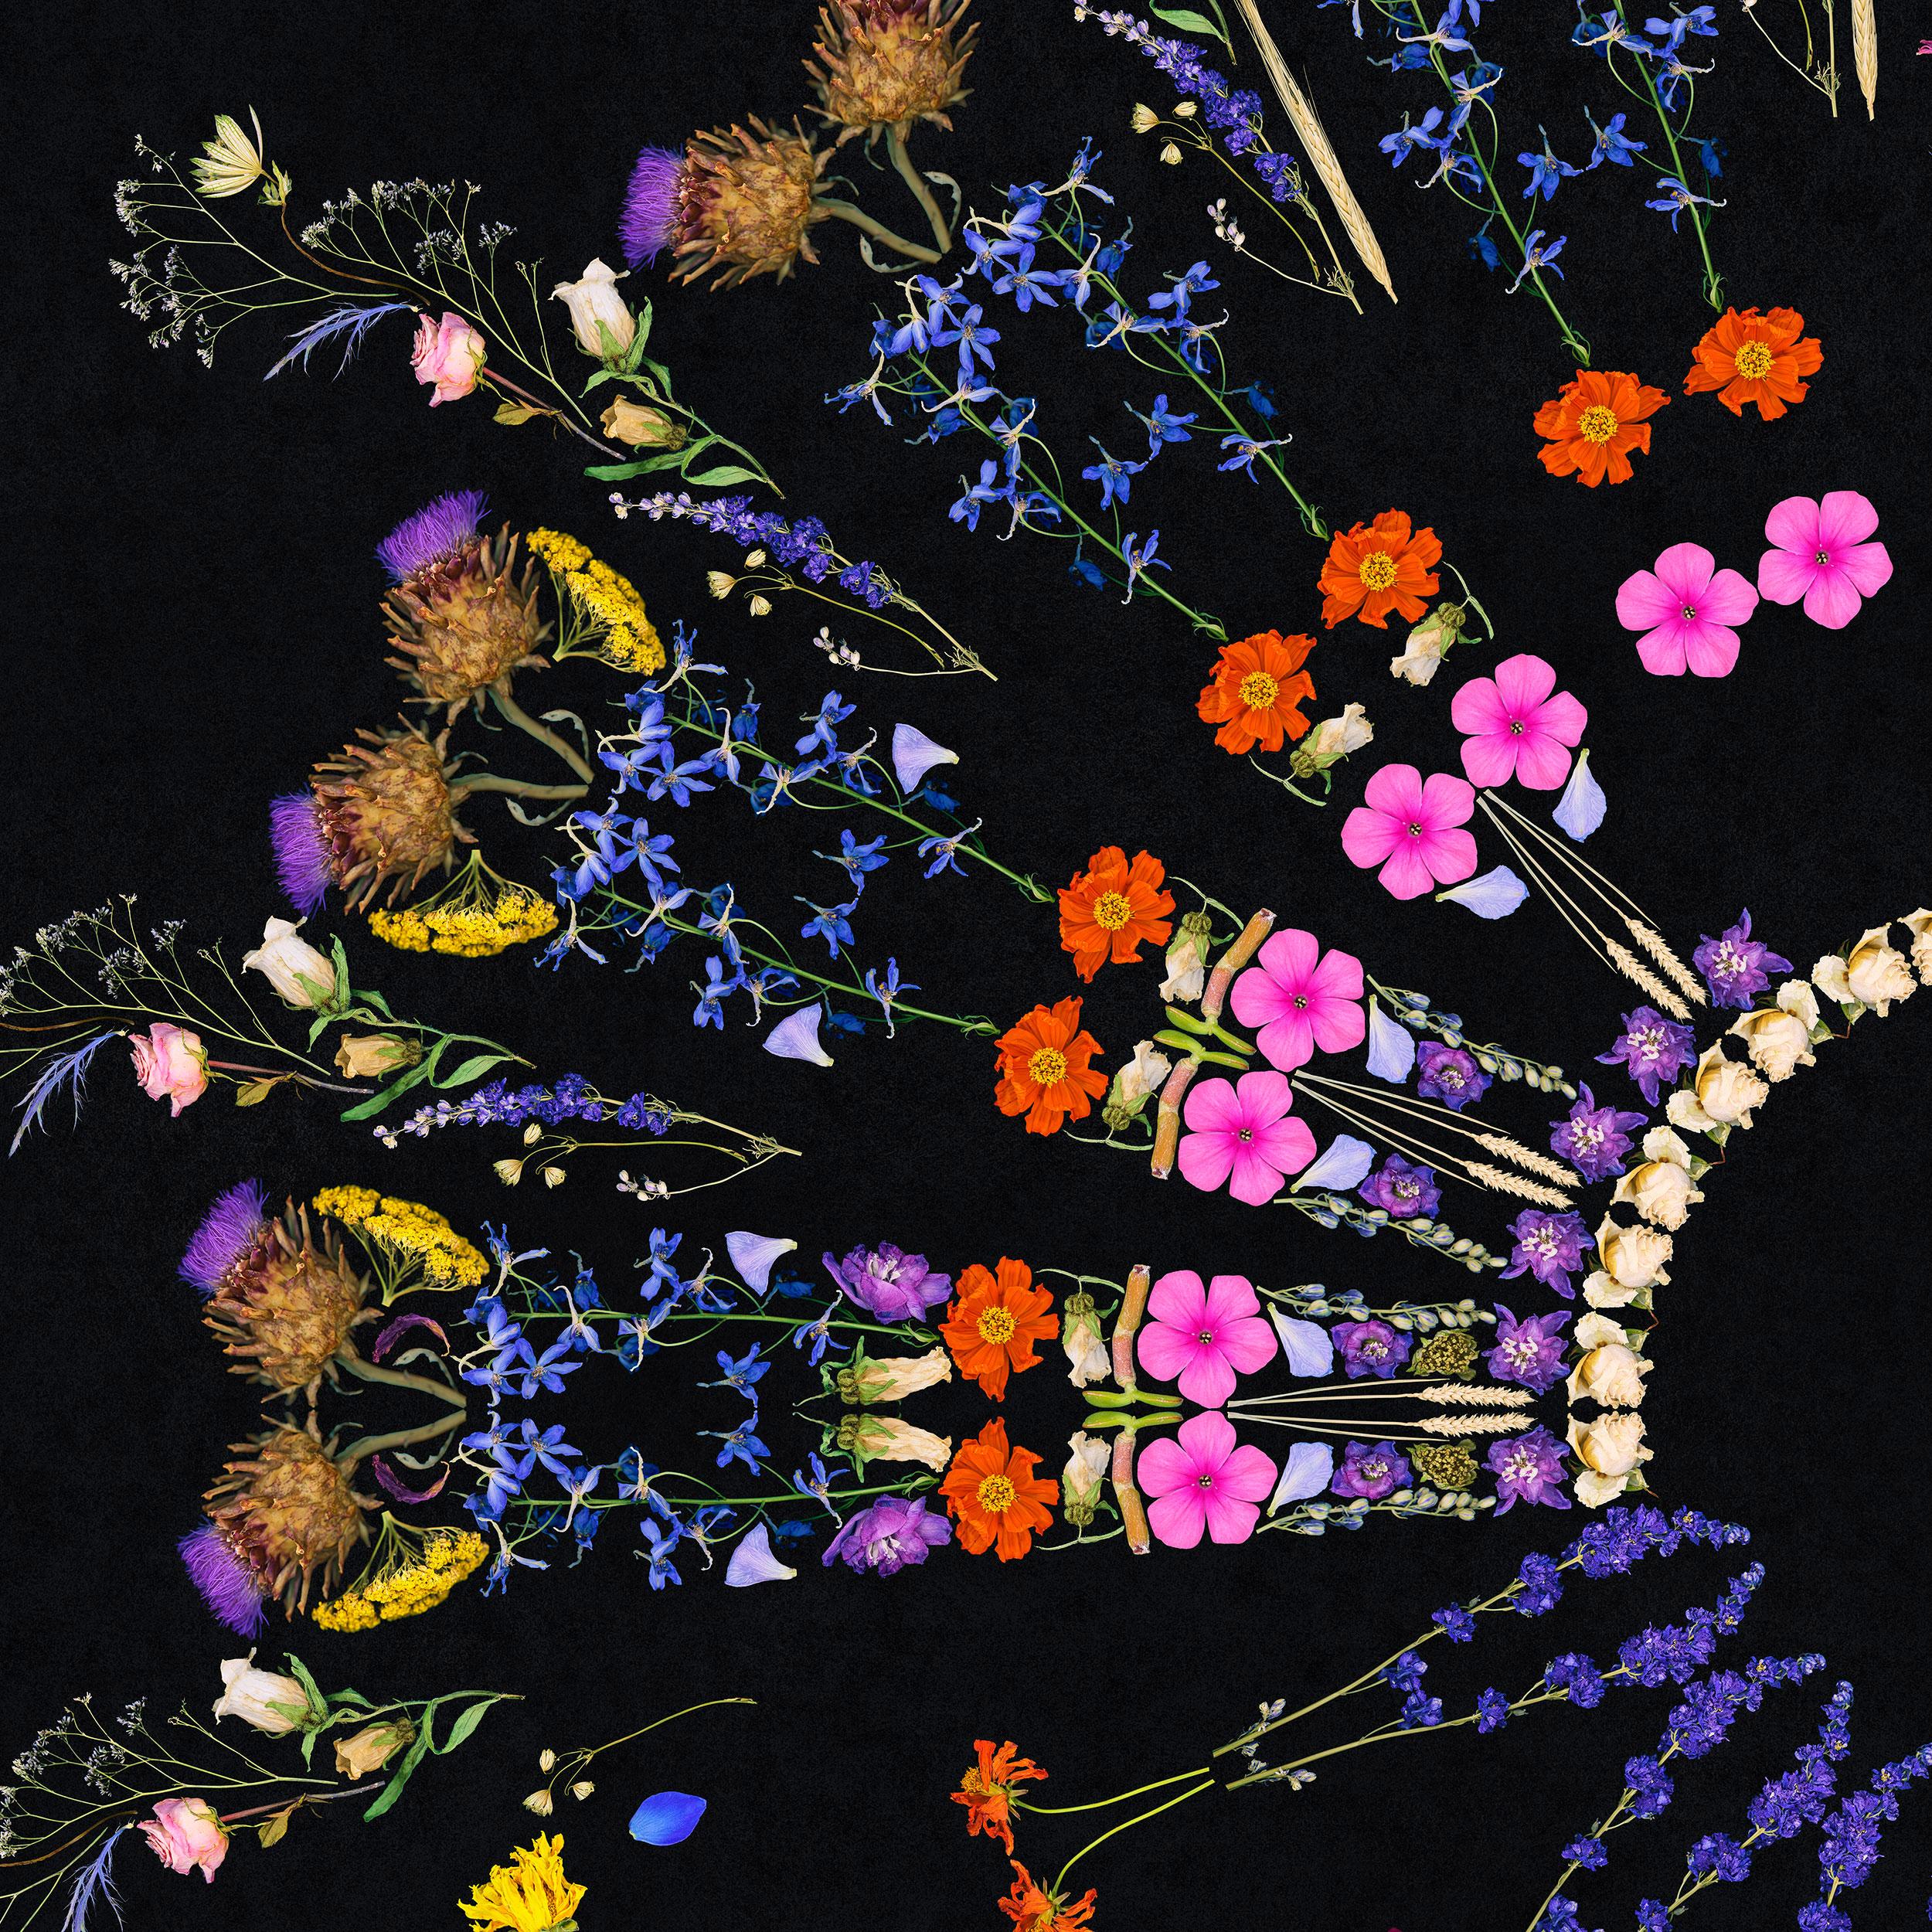 Florist, Mandala - collage of dead flowers - Photograph by George McLeod